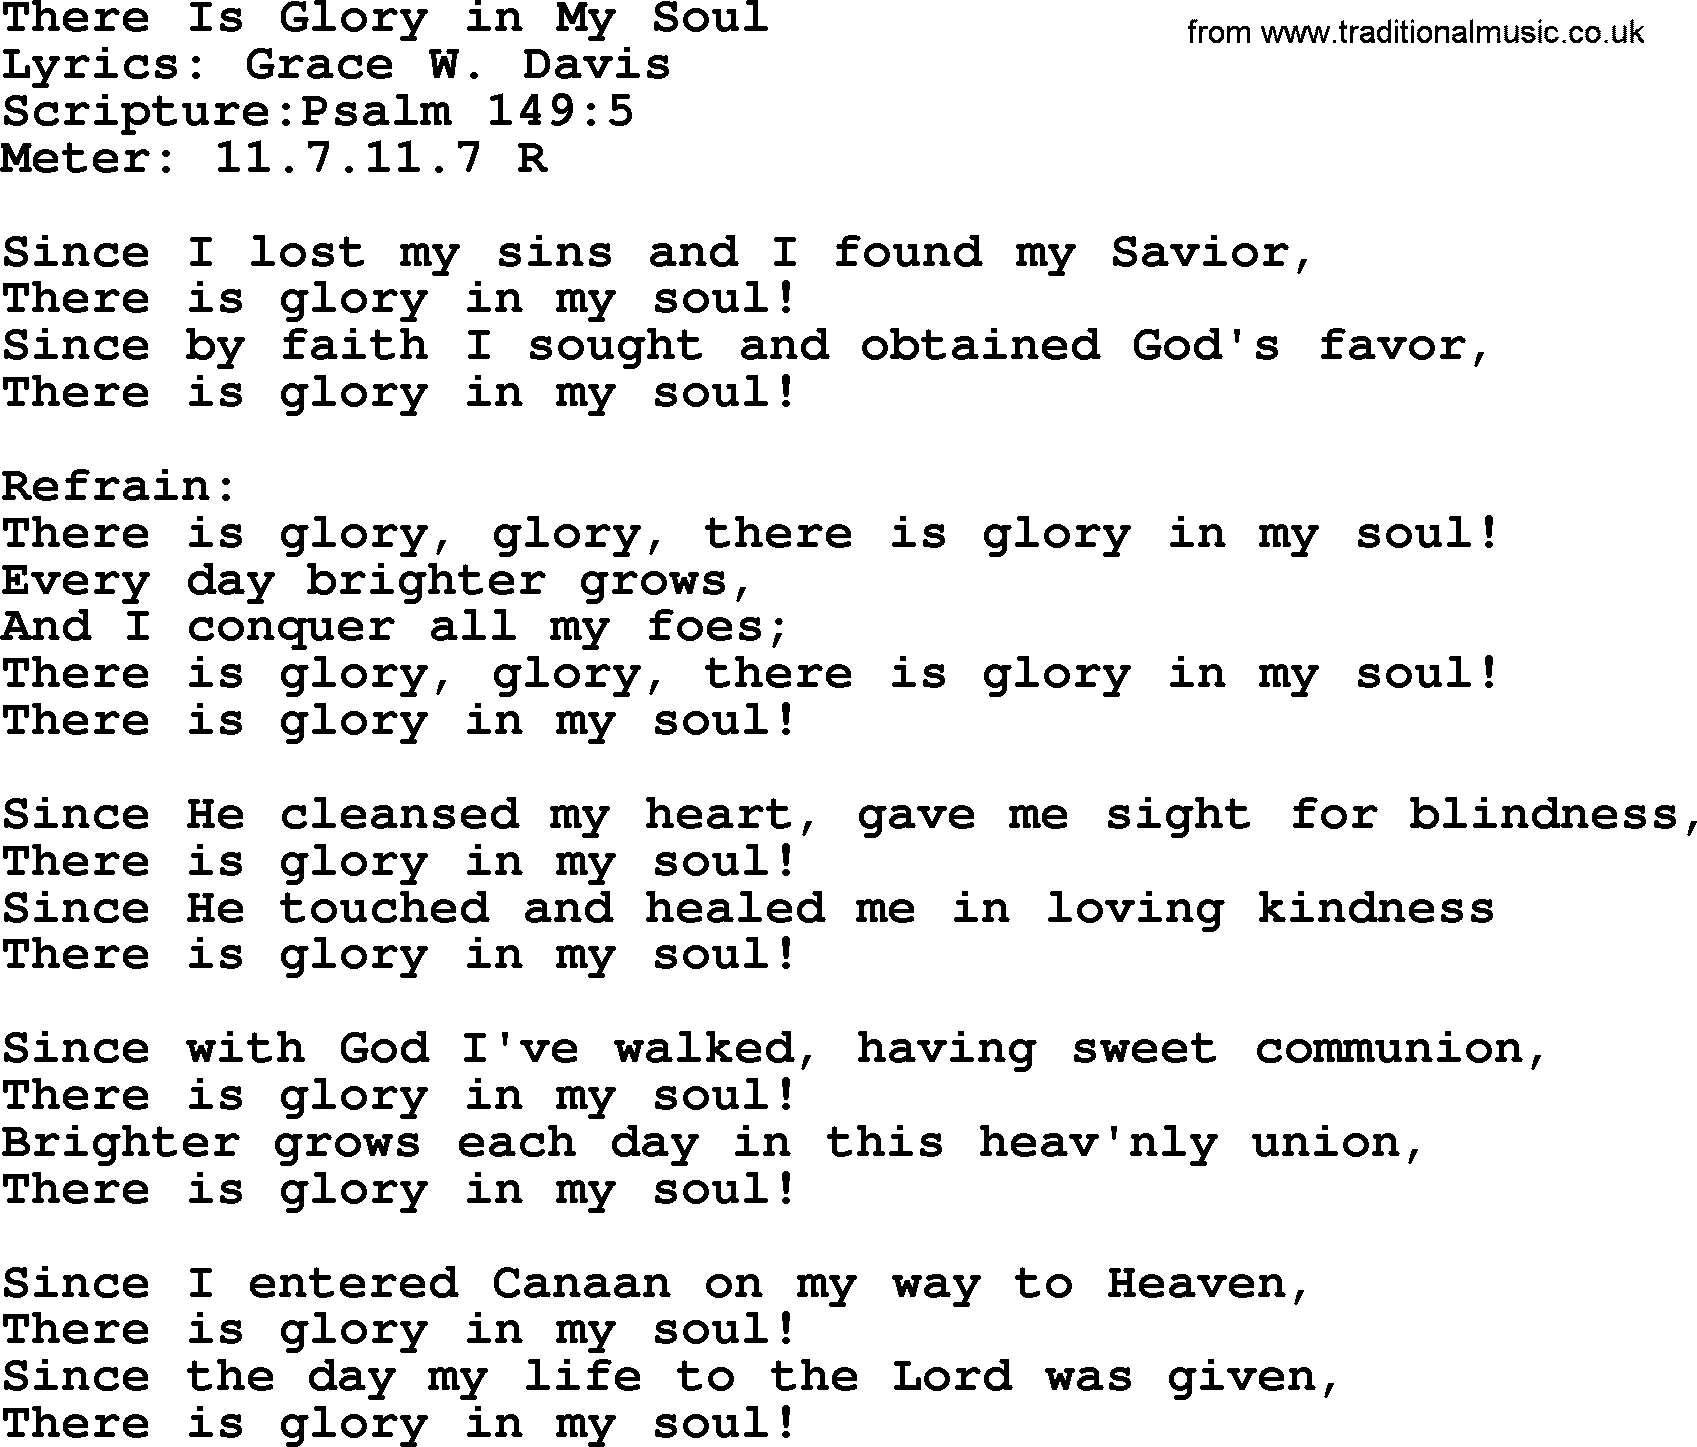 Hymns about  Angels, Hymn: There Is Glory in My Soul, lyrics, sheet music, midi & Mp3 music with PDF